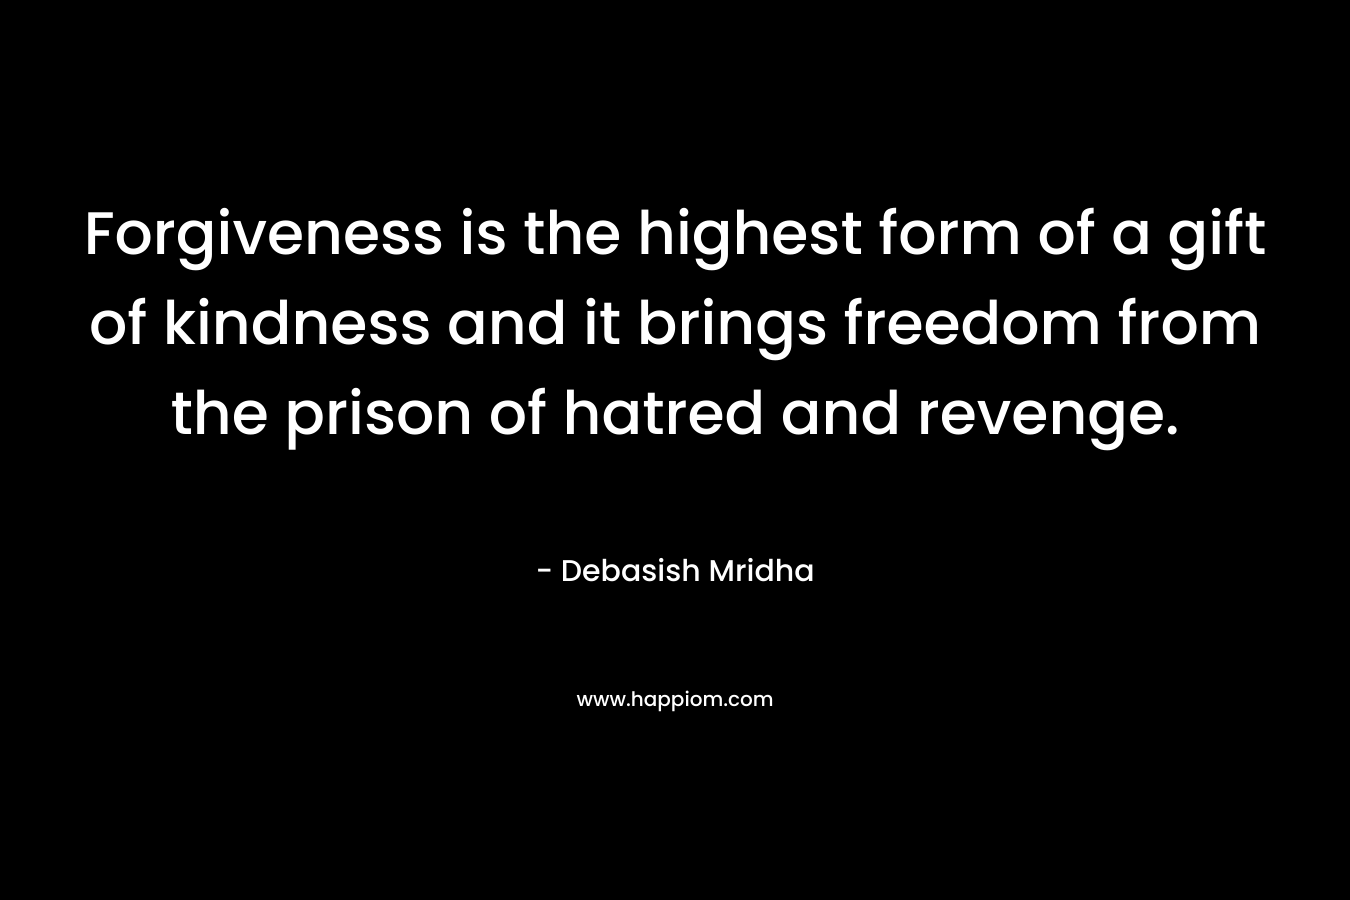 Forgiveness is the highest form of a gift of kindness and it brings freedom from the prison of hatred and revenge.